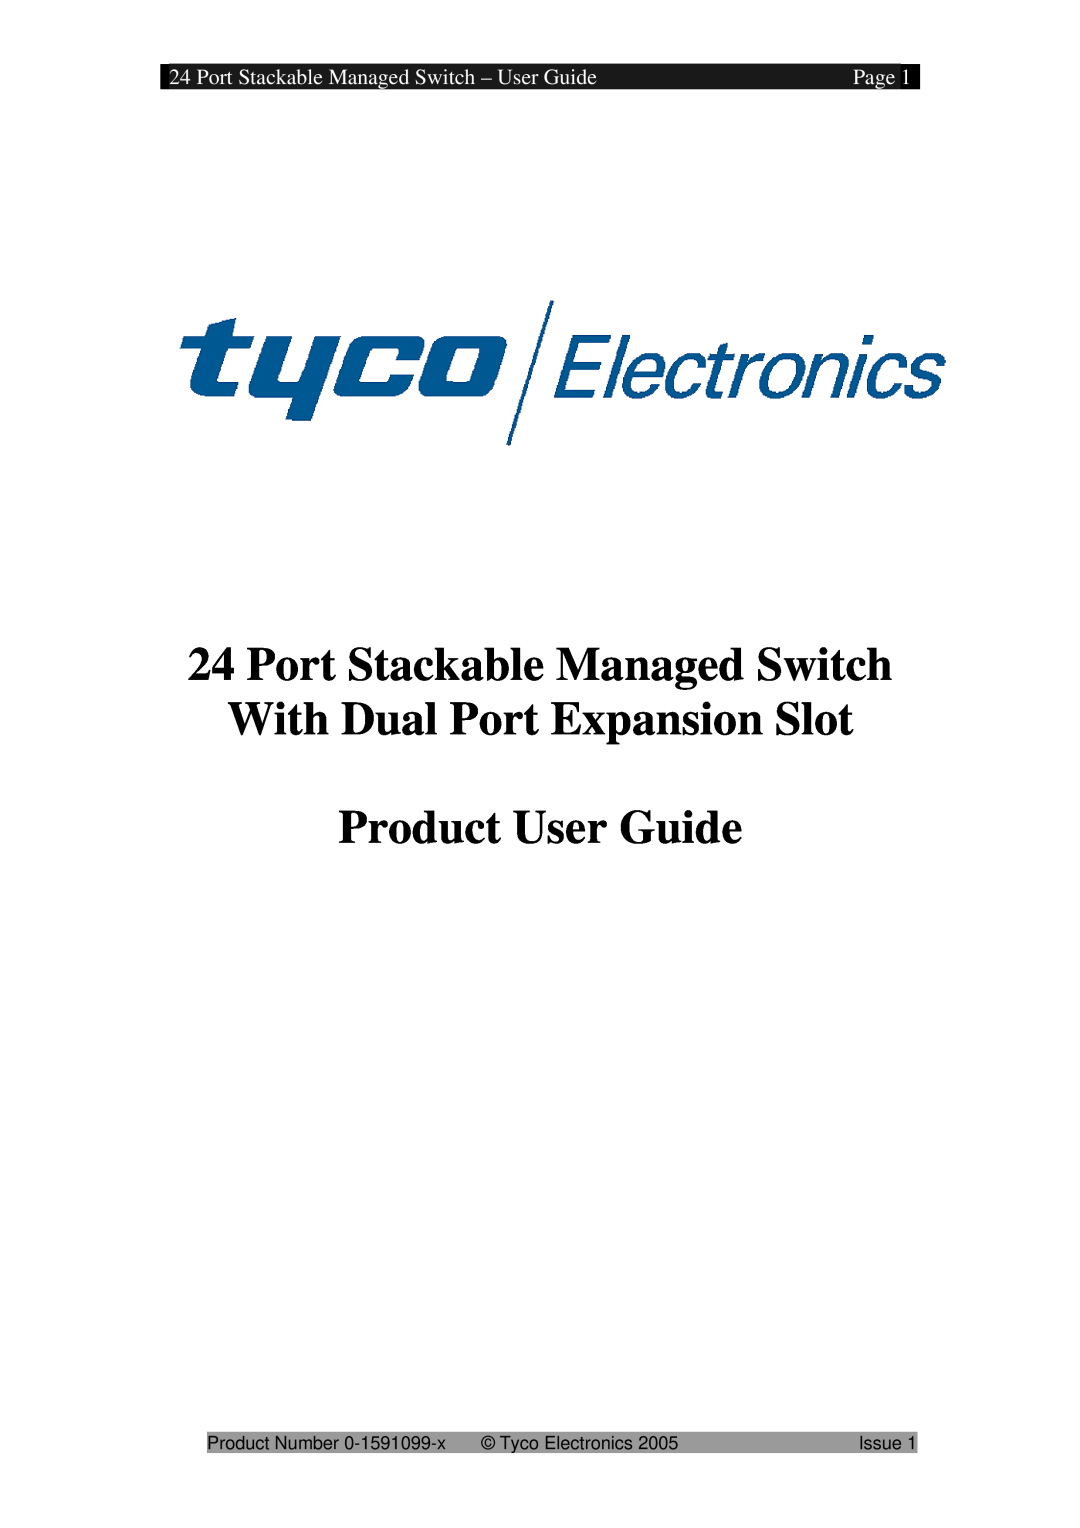 Tyco 0-1591099-x manual Port Stackable Managed Switch With Dual Port Expansion Slot, Product User Guide, Page 